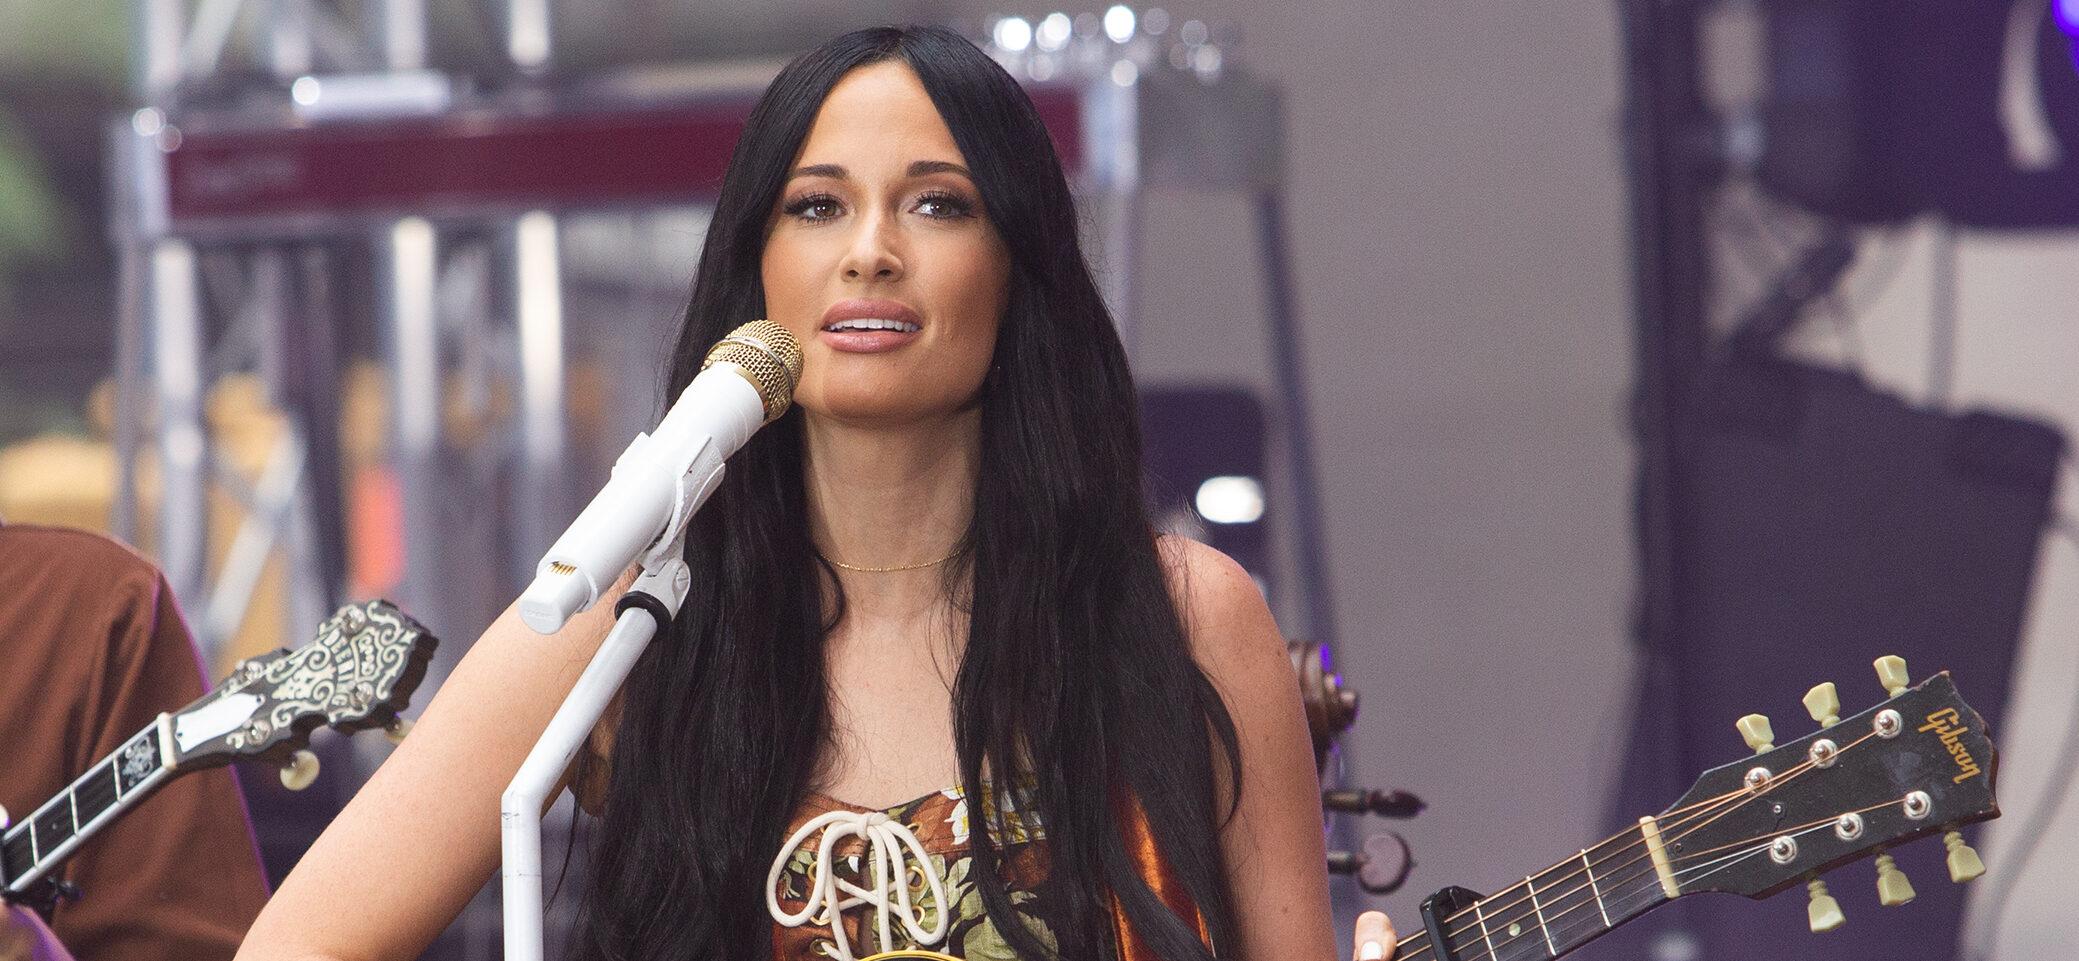 Kacey Musgraves Responds To New Album's Exclusion From Country Category: 'Can't Take The Country Out Of The Girl'